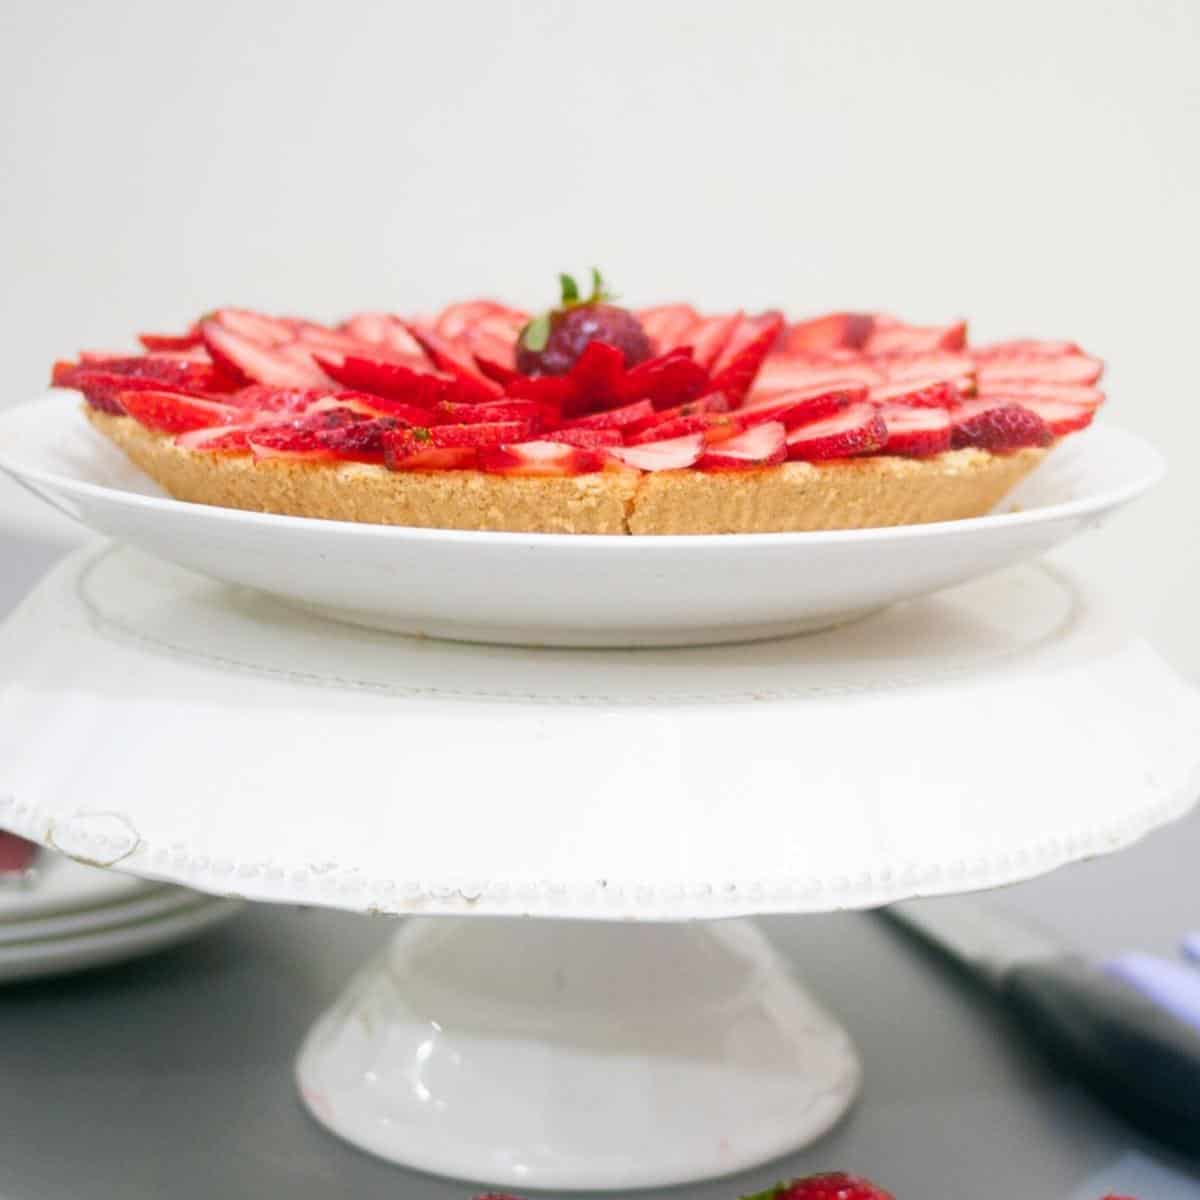 A tart with fresh fruit and pastry cream